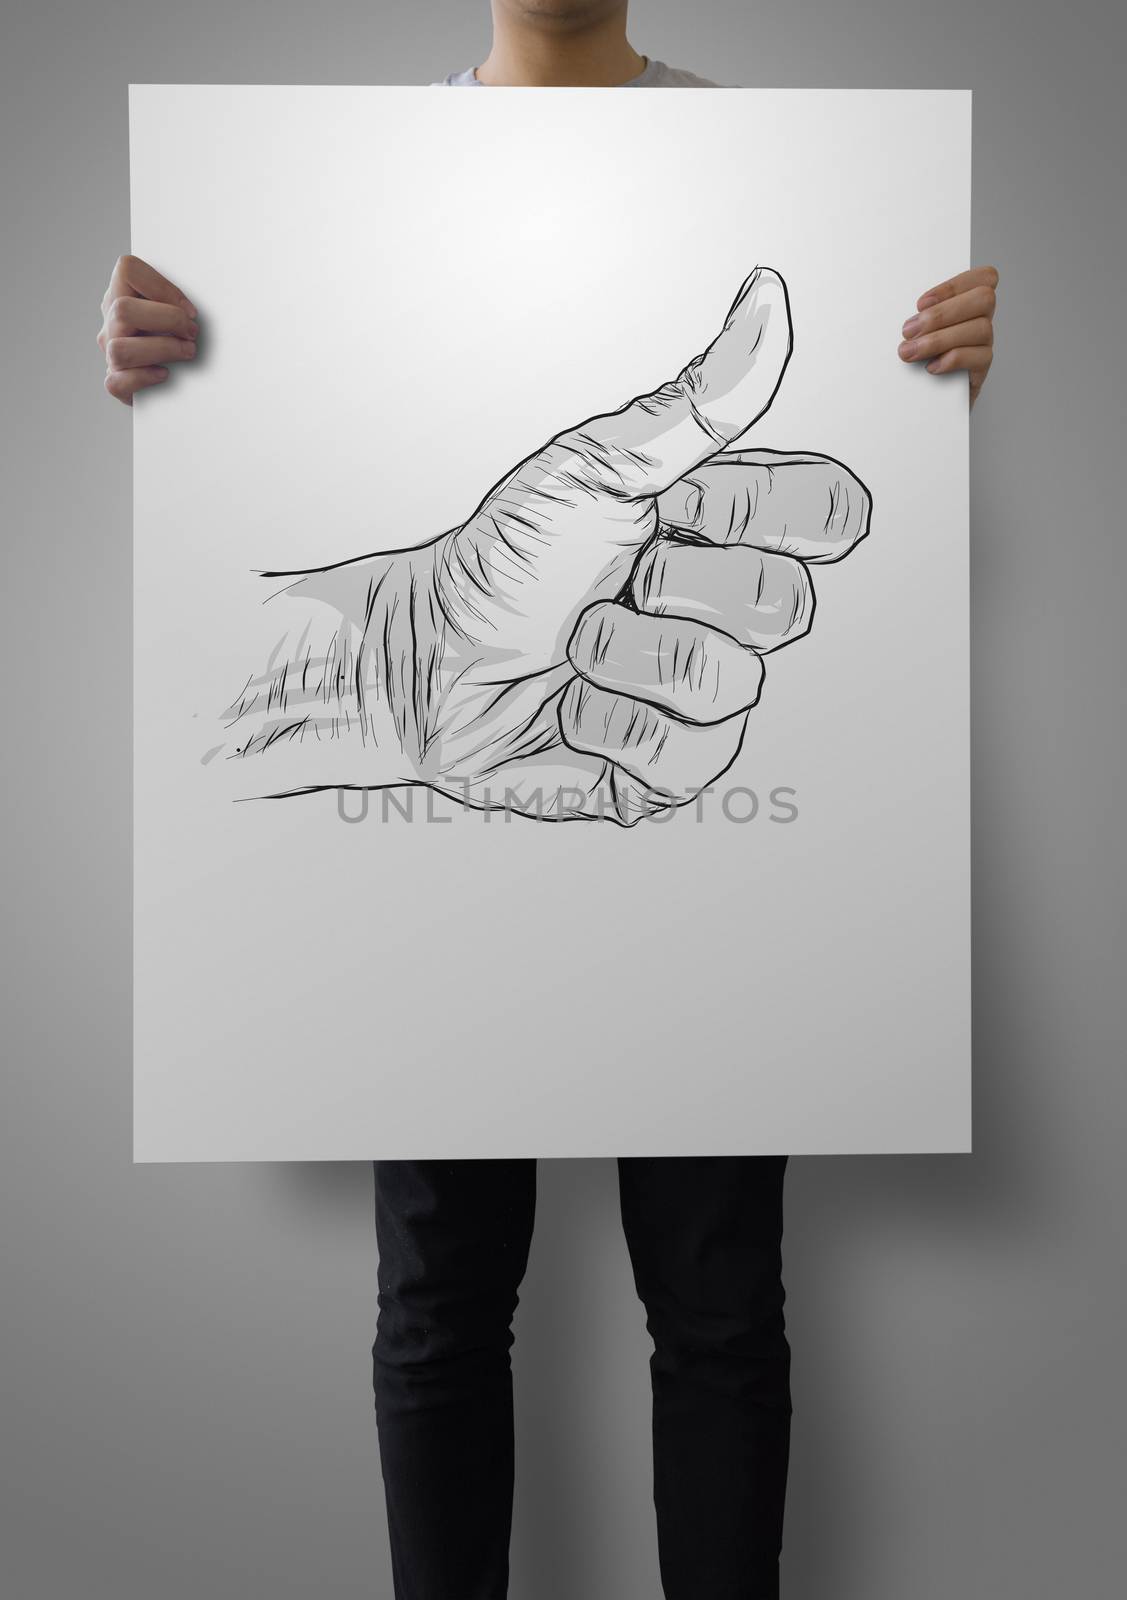 man showing poster hand drawn of hand giving a thumbs up as concept 